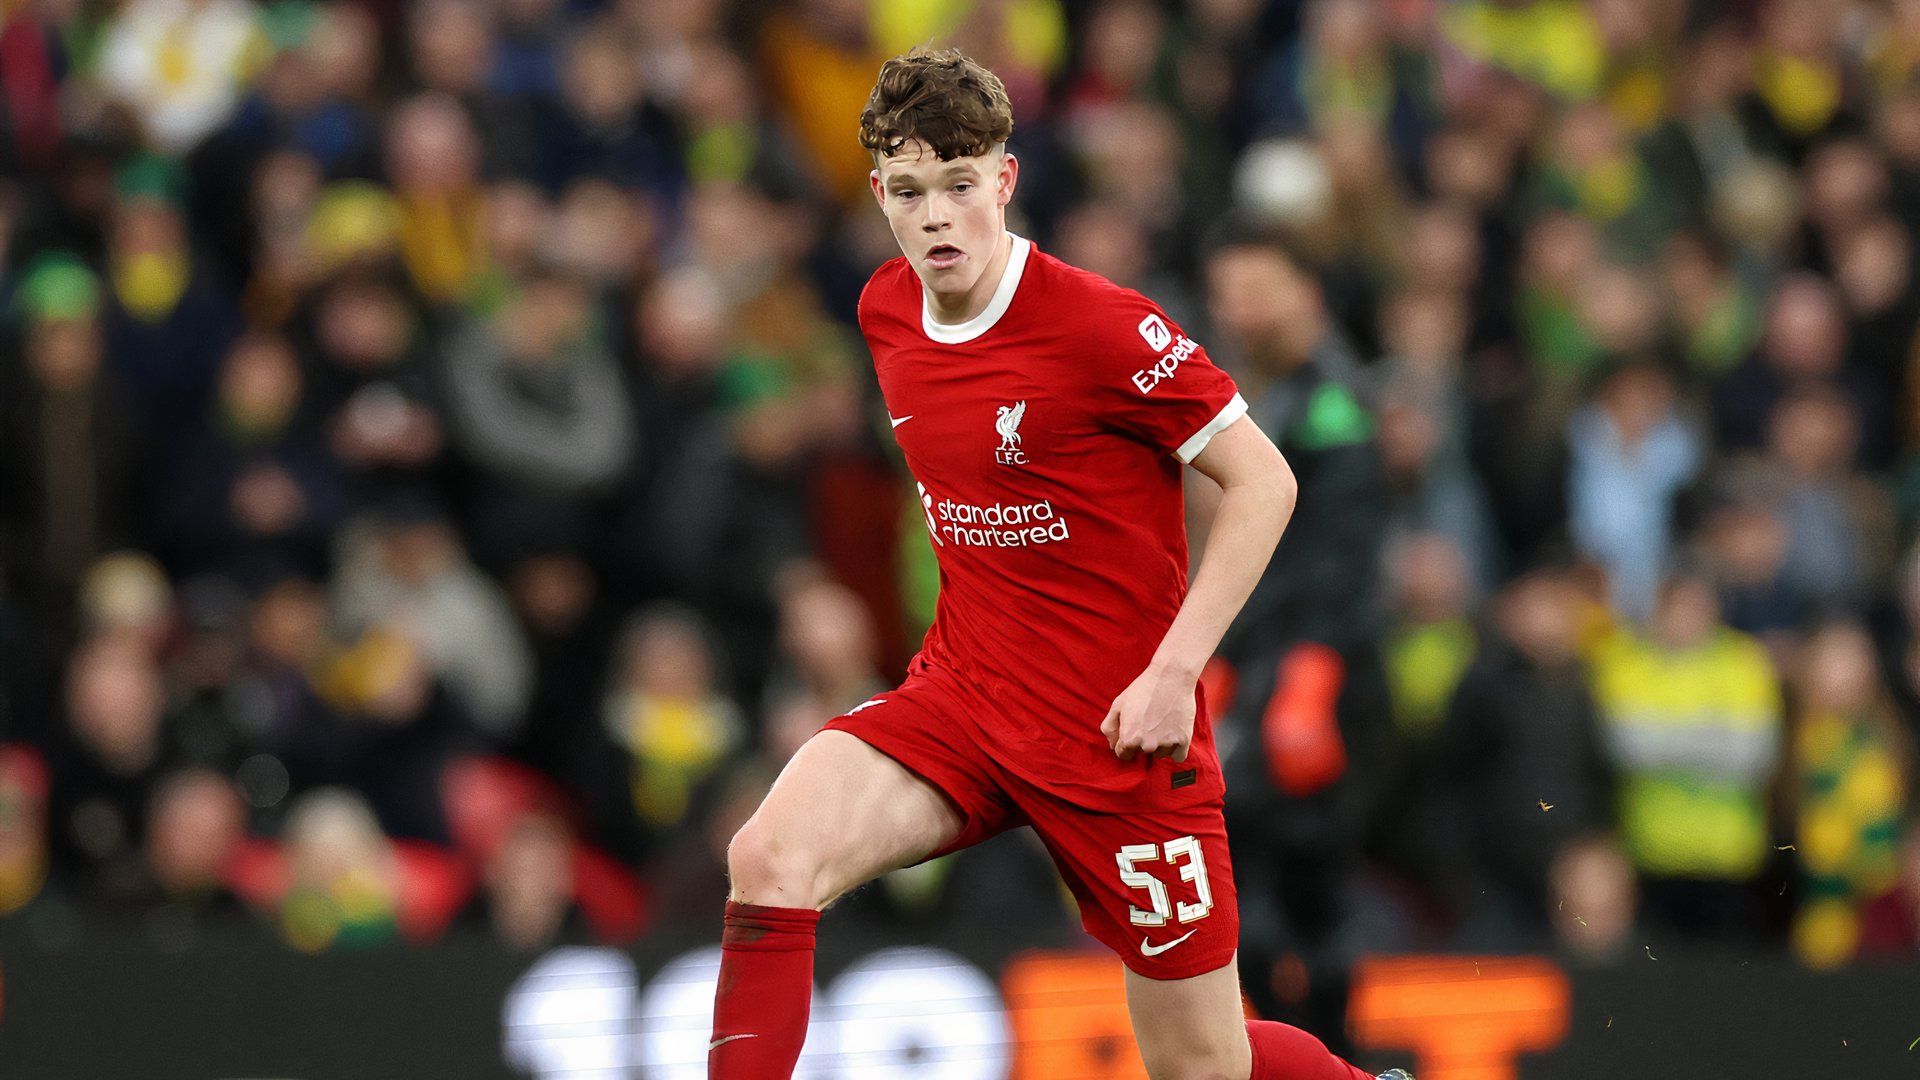 Hull City keen to capitalise on Liverpool relationship with deal for James McConnell